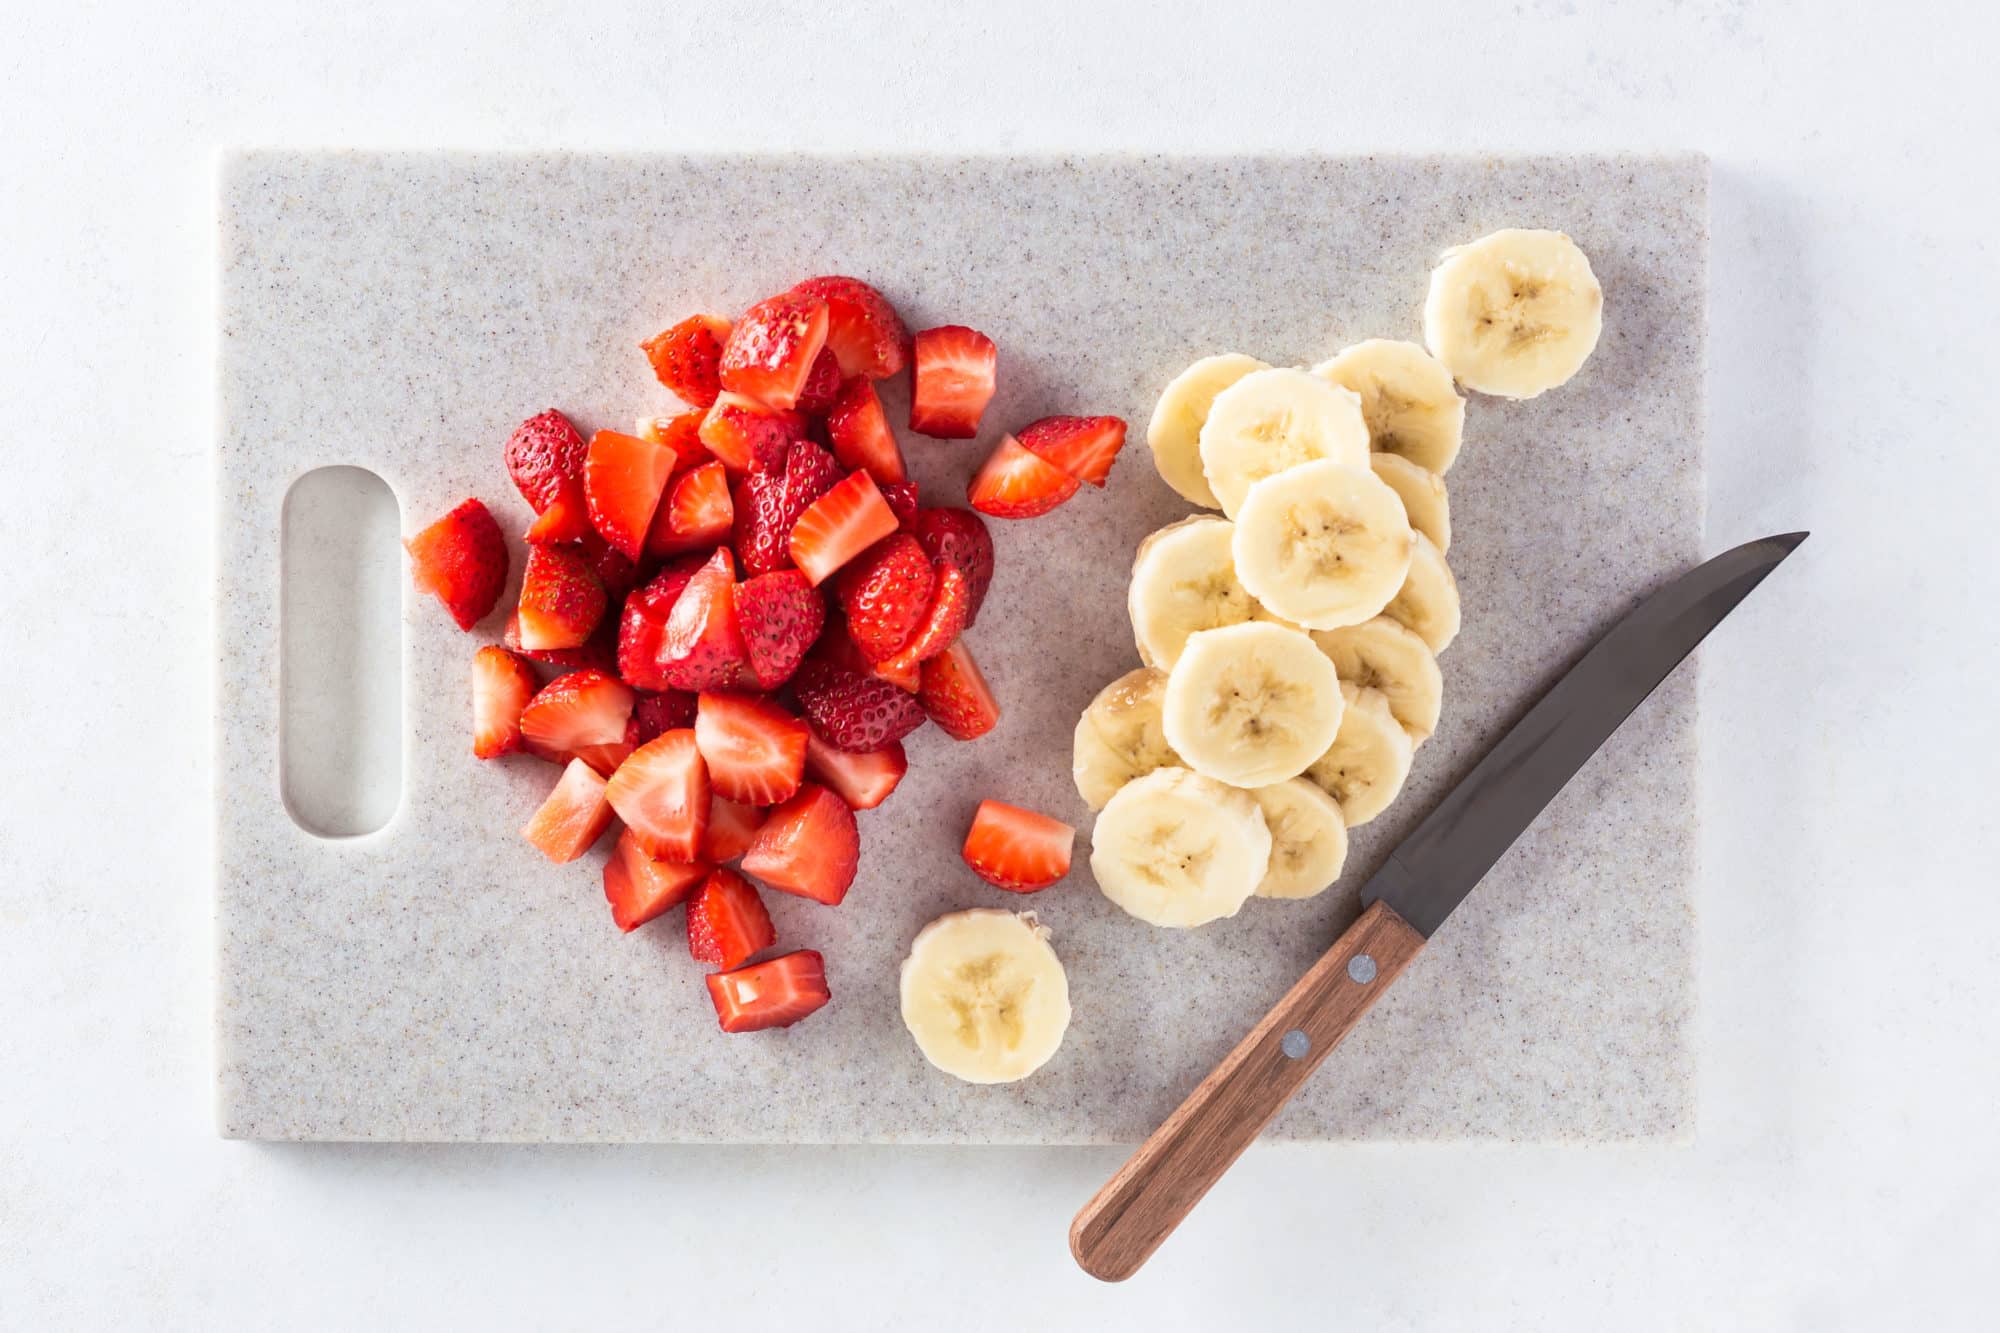 cutting-board-with-knife-chopped-strawberries-and-bananas